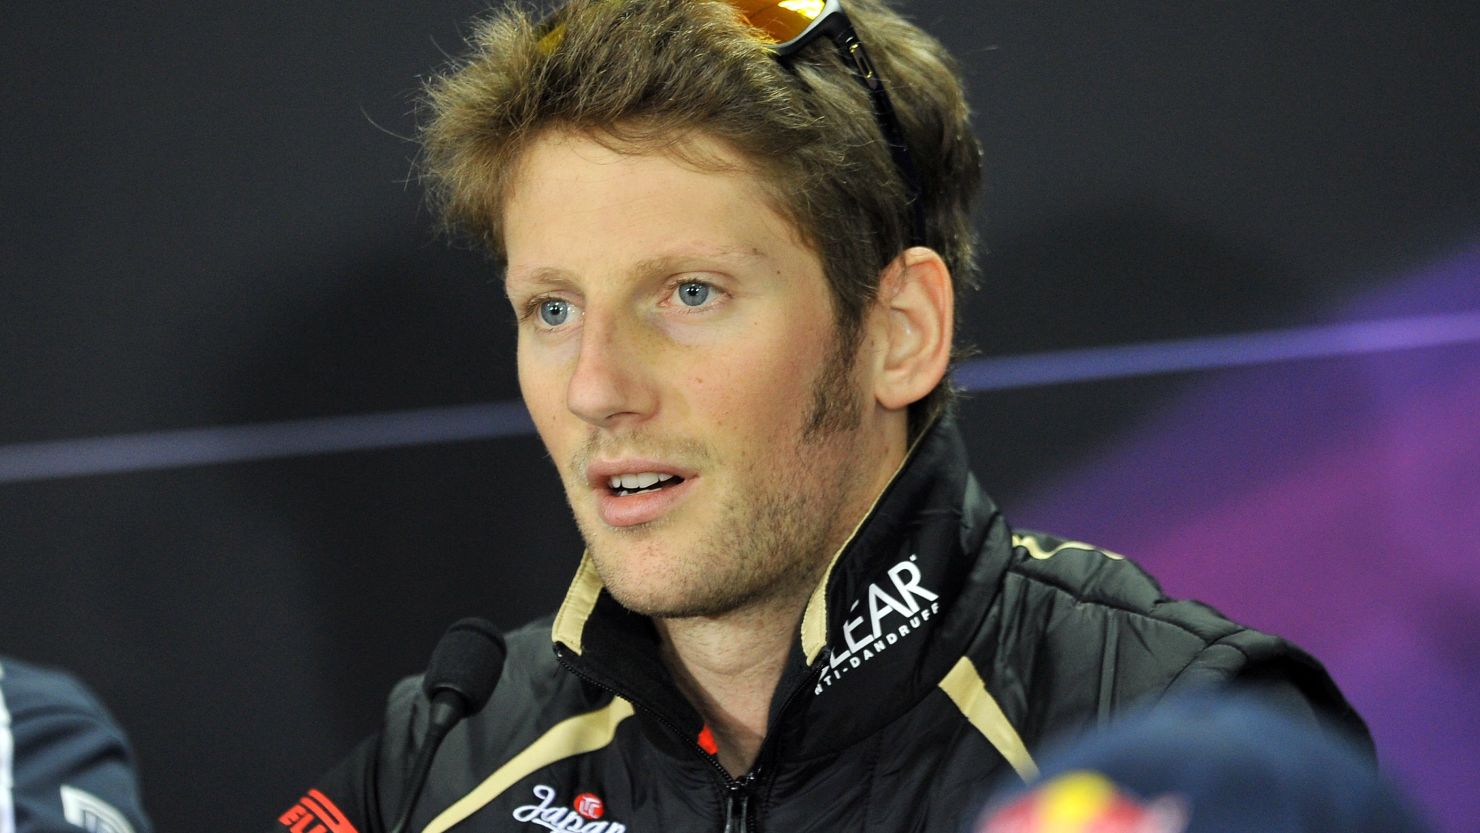 Romain Grosjean finished eighth in the 2012 Formula One drivers' championship on 96 points